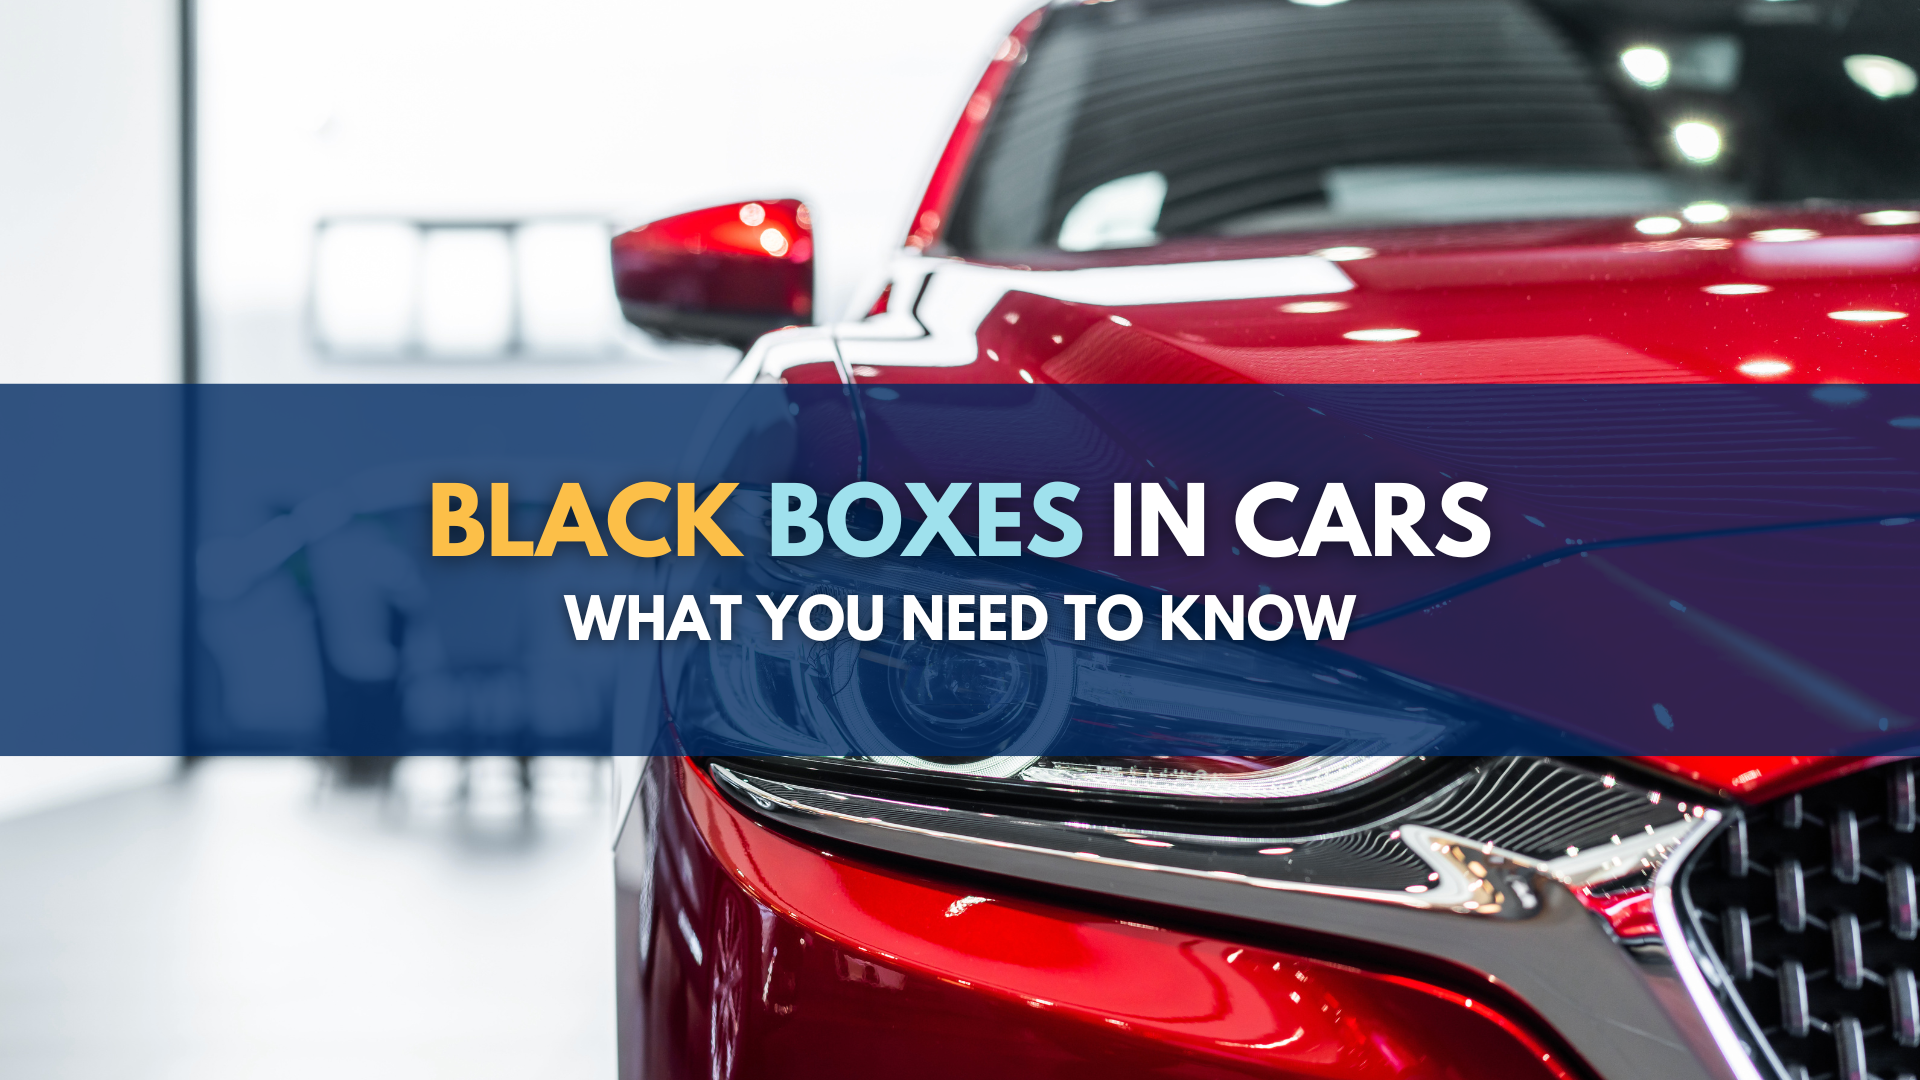 Black Boxes In Cars: What You Need To Know